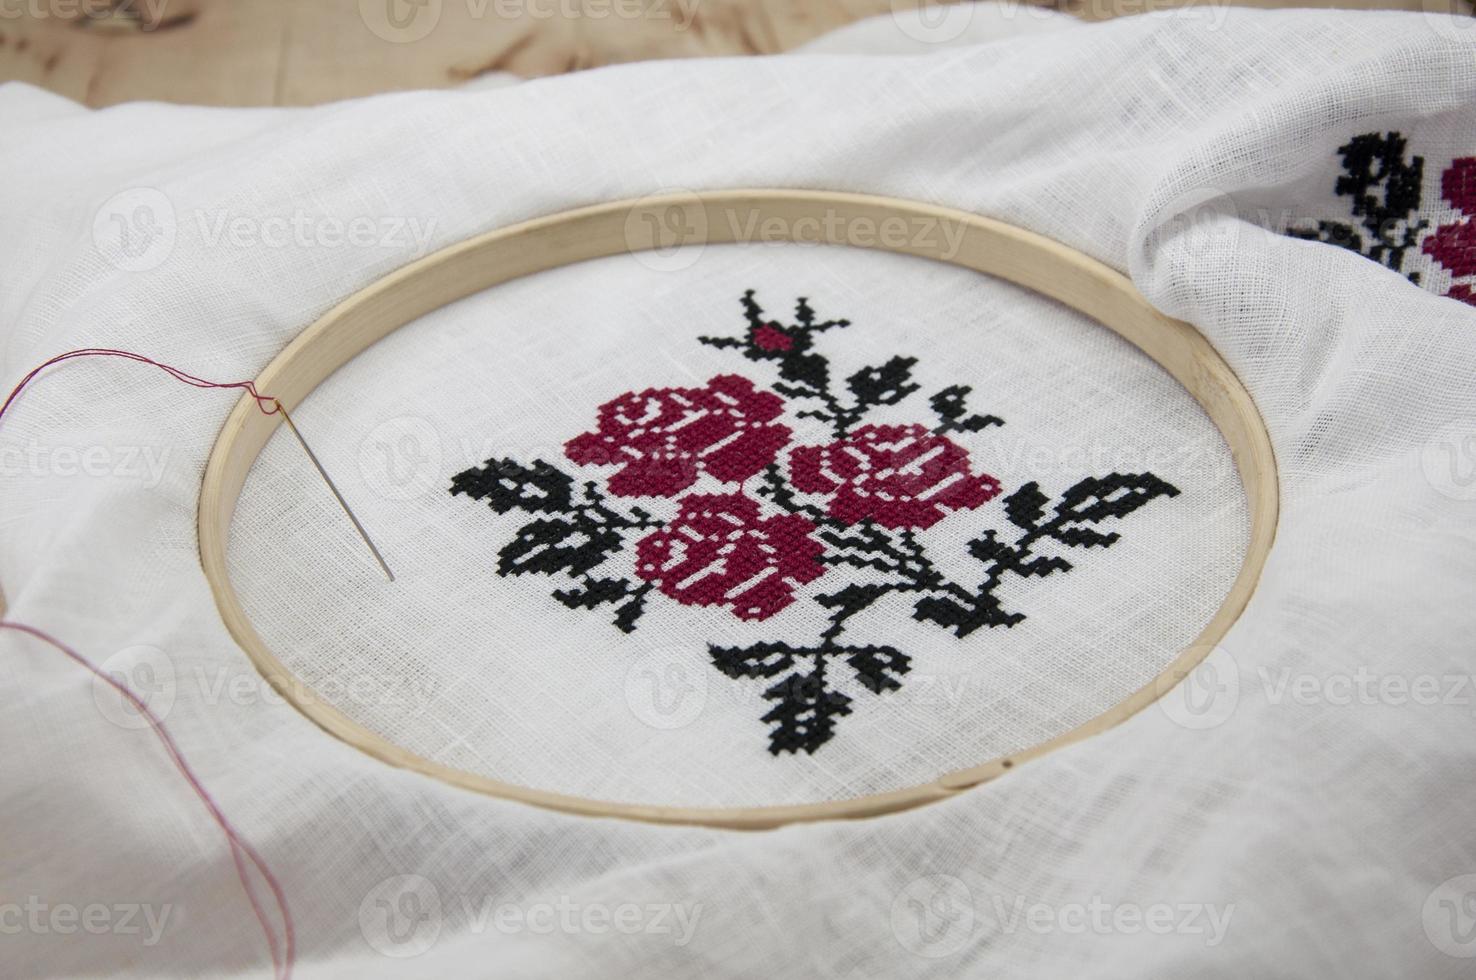 Embroidered pattern in the hoop photo